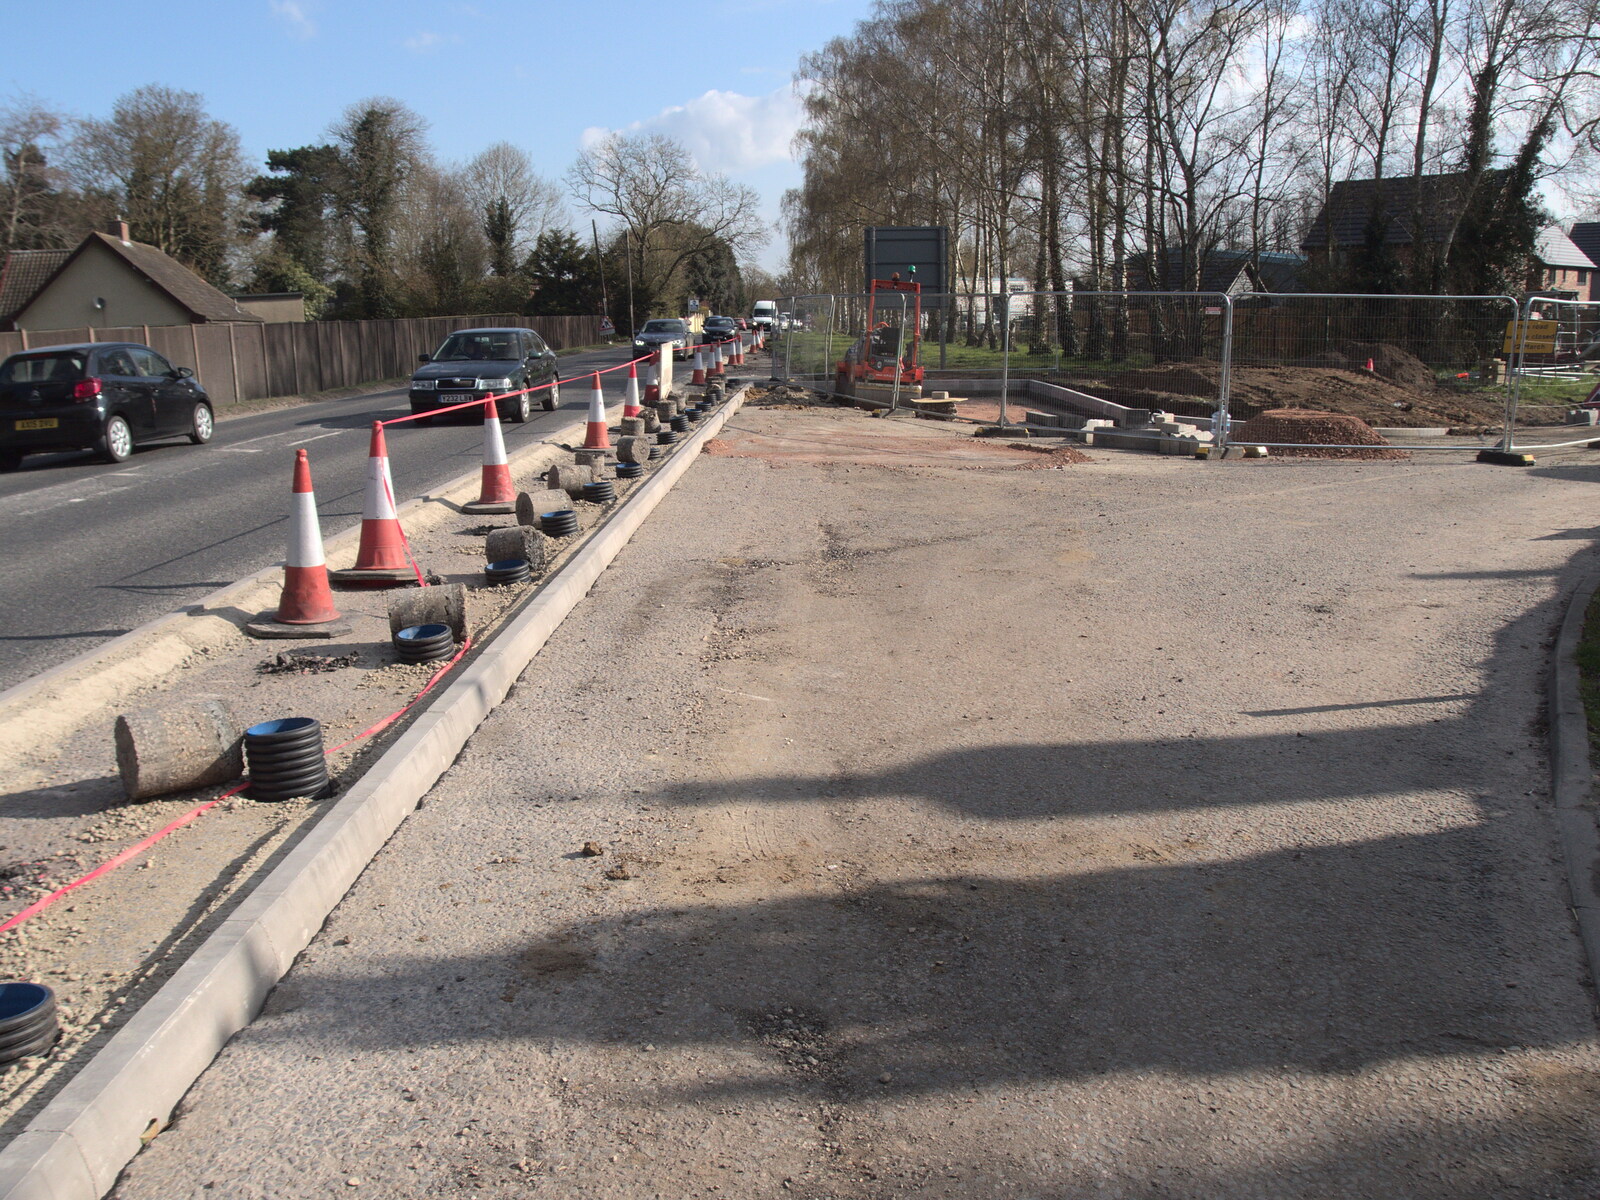 The road is now blocked off from Roadworks and Harry's Trampoline, Brome, Suffolk - 6th April 2021